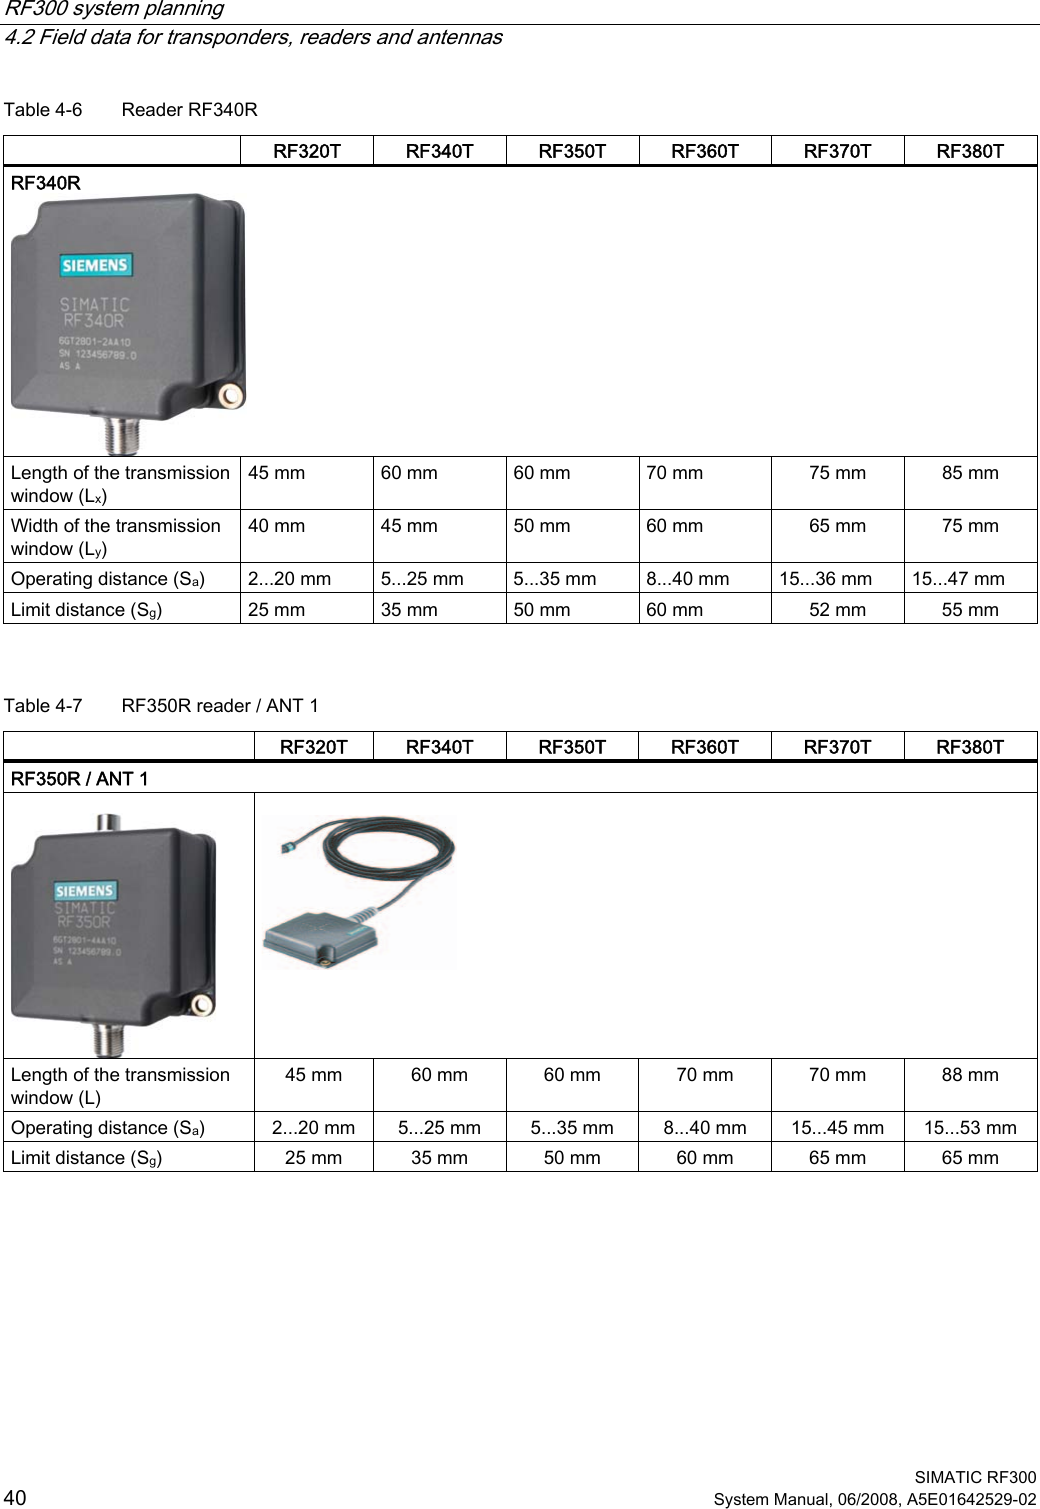 RF300 system planning   4.2 Field data for transponders, readers and antennas  SIMATIC RF300 40 System Manual, 06/2008, A5E01642529-02 Table 4-6  Reader RF340R   RF320T  RF340T  RF350T  RF360T  RF370T  RF380T RF340R  Length of the transmission window (Lx) 45 mm  60 mm  60 mm  70 mm  75 mm  85 mm Width of the transmission window (Ly) 40 mm  45 mm  50 mm  60 mm  65 mm  75 mm Operating distance (Sa)  2...20 mm  5...25 mm  5...35 mm  8...40 mm  15...36 mm  15...47 mm Limit distance (Sg)  25 mm  35 mm  50 mm  60 mm  52 mm  55 mm  Table 4-7  RF350R reader / ANT 1   RF320T  RF340T  RF350T  RF360T  RF370T  RF380T RF350R / ANT 1     Length of the transmission window (L) 45 mm  60 mm  60 mm  70 mm  70 mm  88 mm Operating distance (Sa)  2...20 mm  5...25 mm  5...35 mm  8...40 mm  15...45 mm  15...53 mm Limit distance (Sg)  25 mm  35 mm  50 mm  60 mm  65 mm  65 mm  